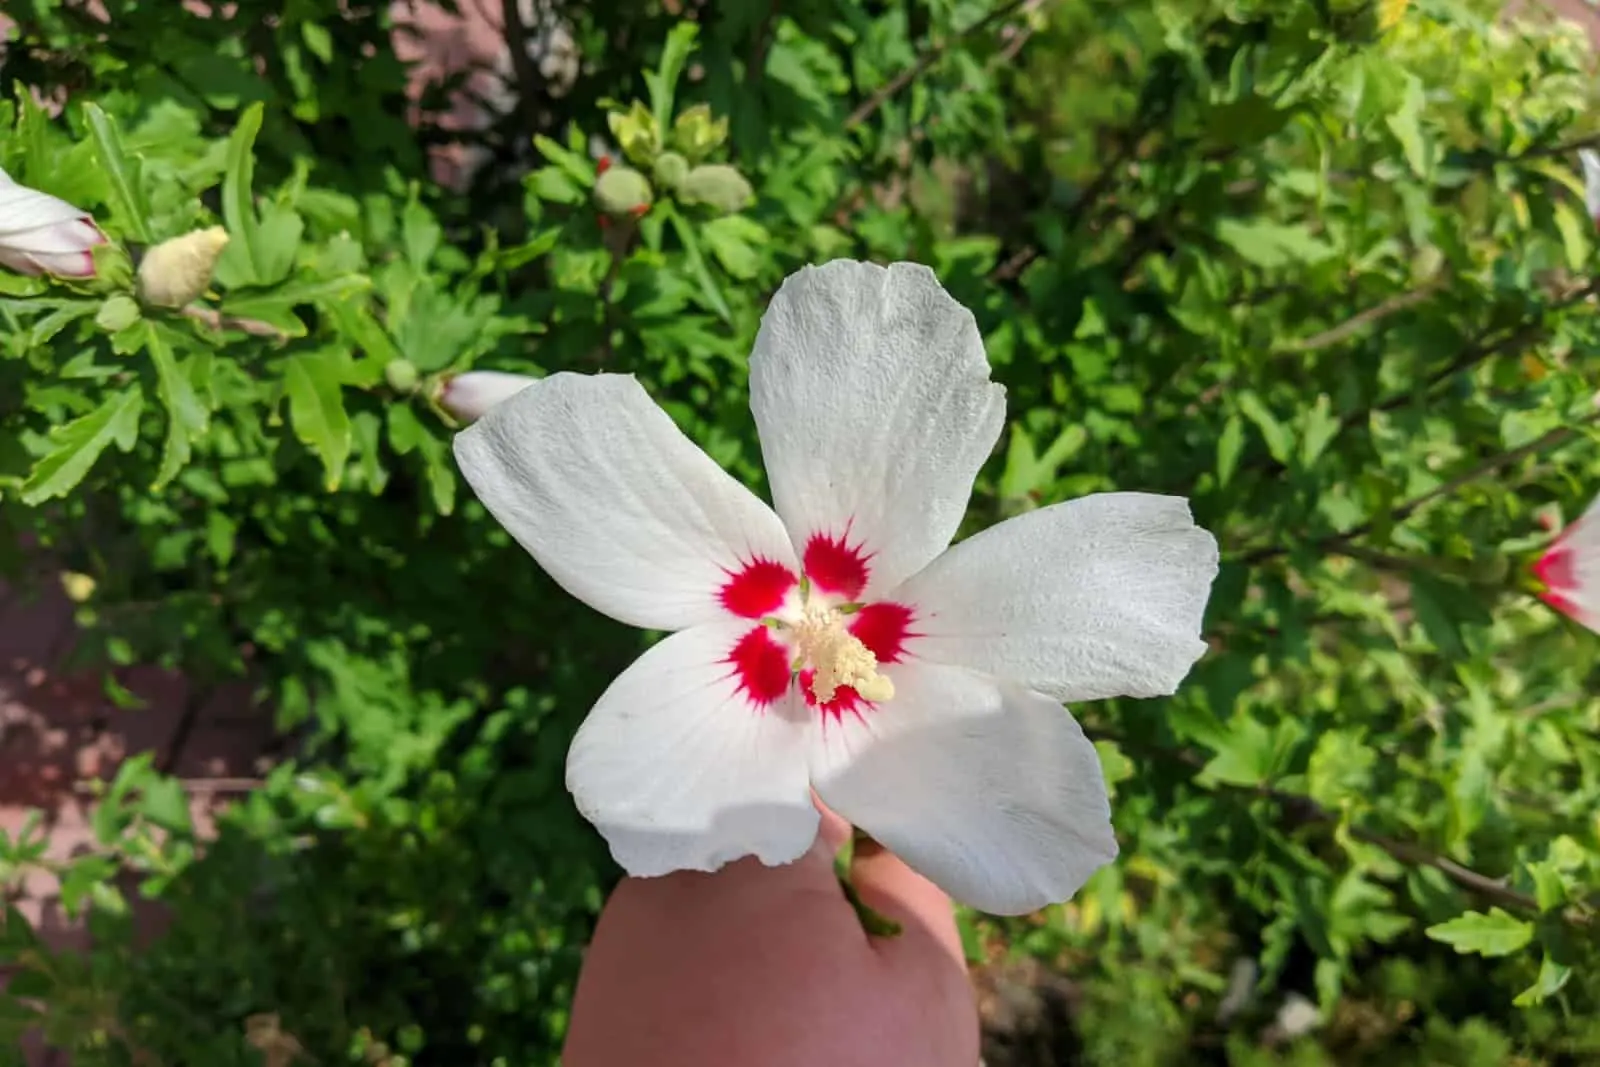 Hibiscus syriacus white with deep red center rose of Sharon 'Red Heart' flower